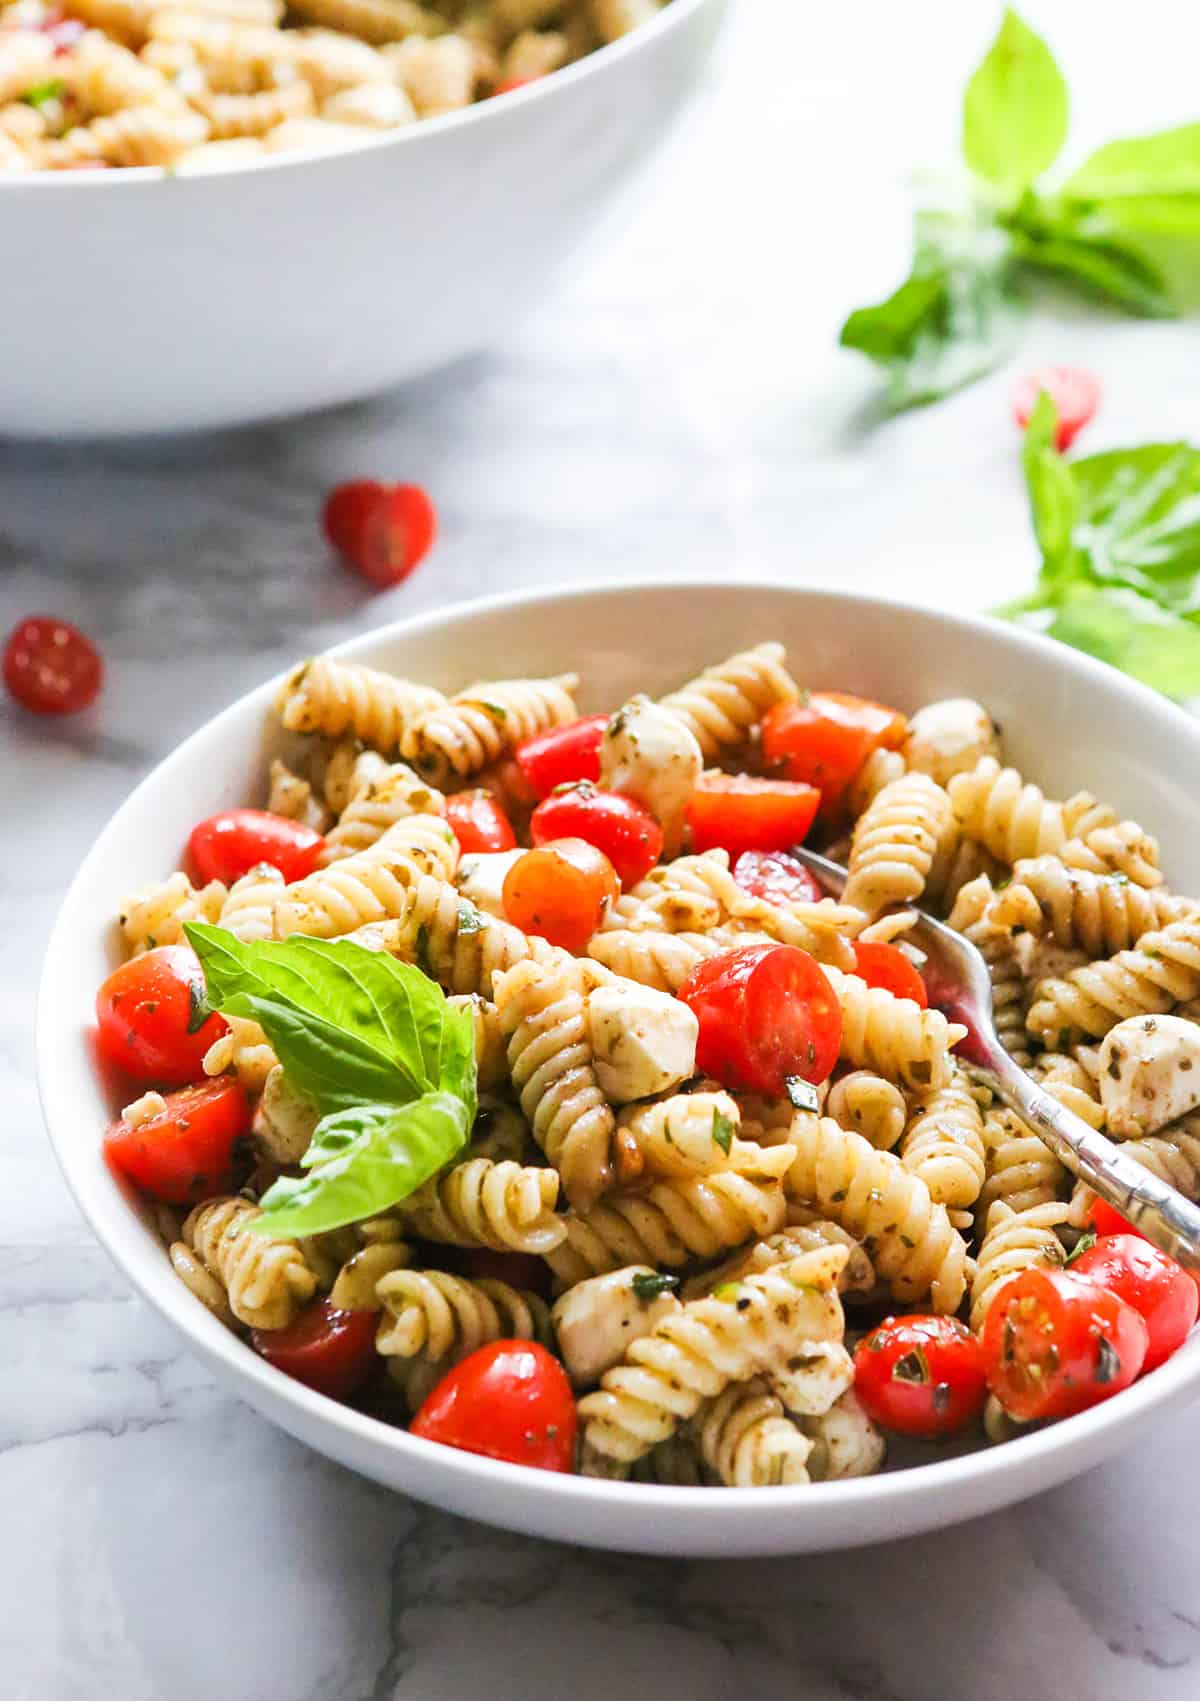 Bowl of caprese pasta salad filled with tomatoes, pasta and mozzarella.